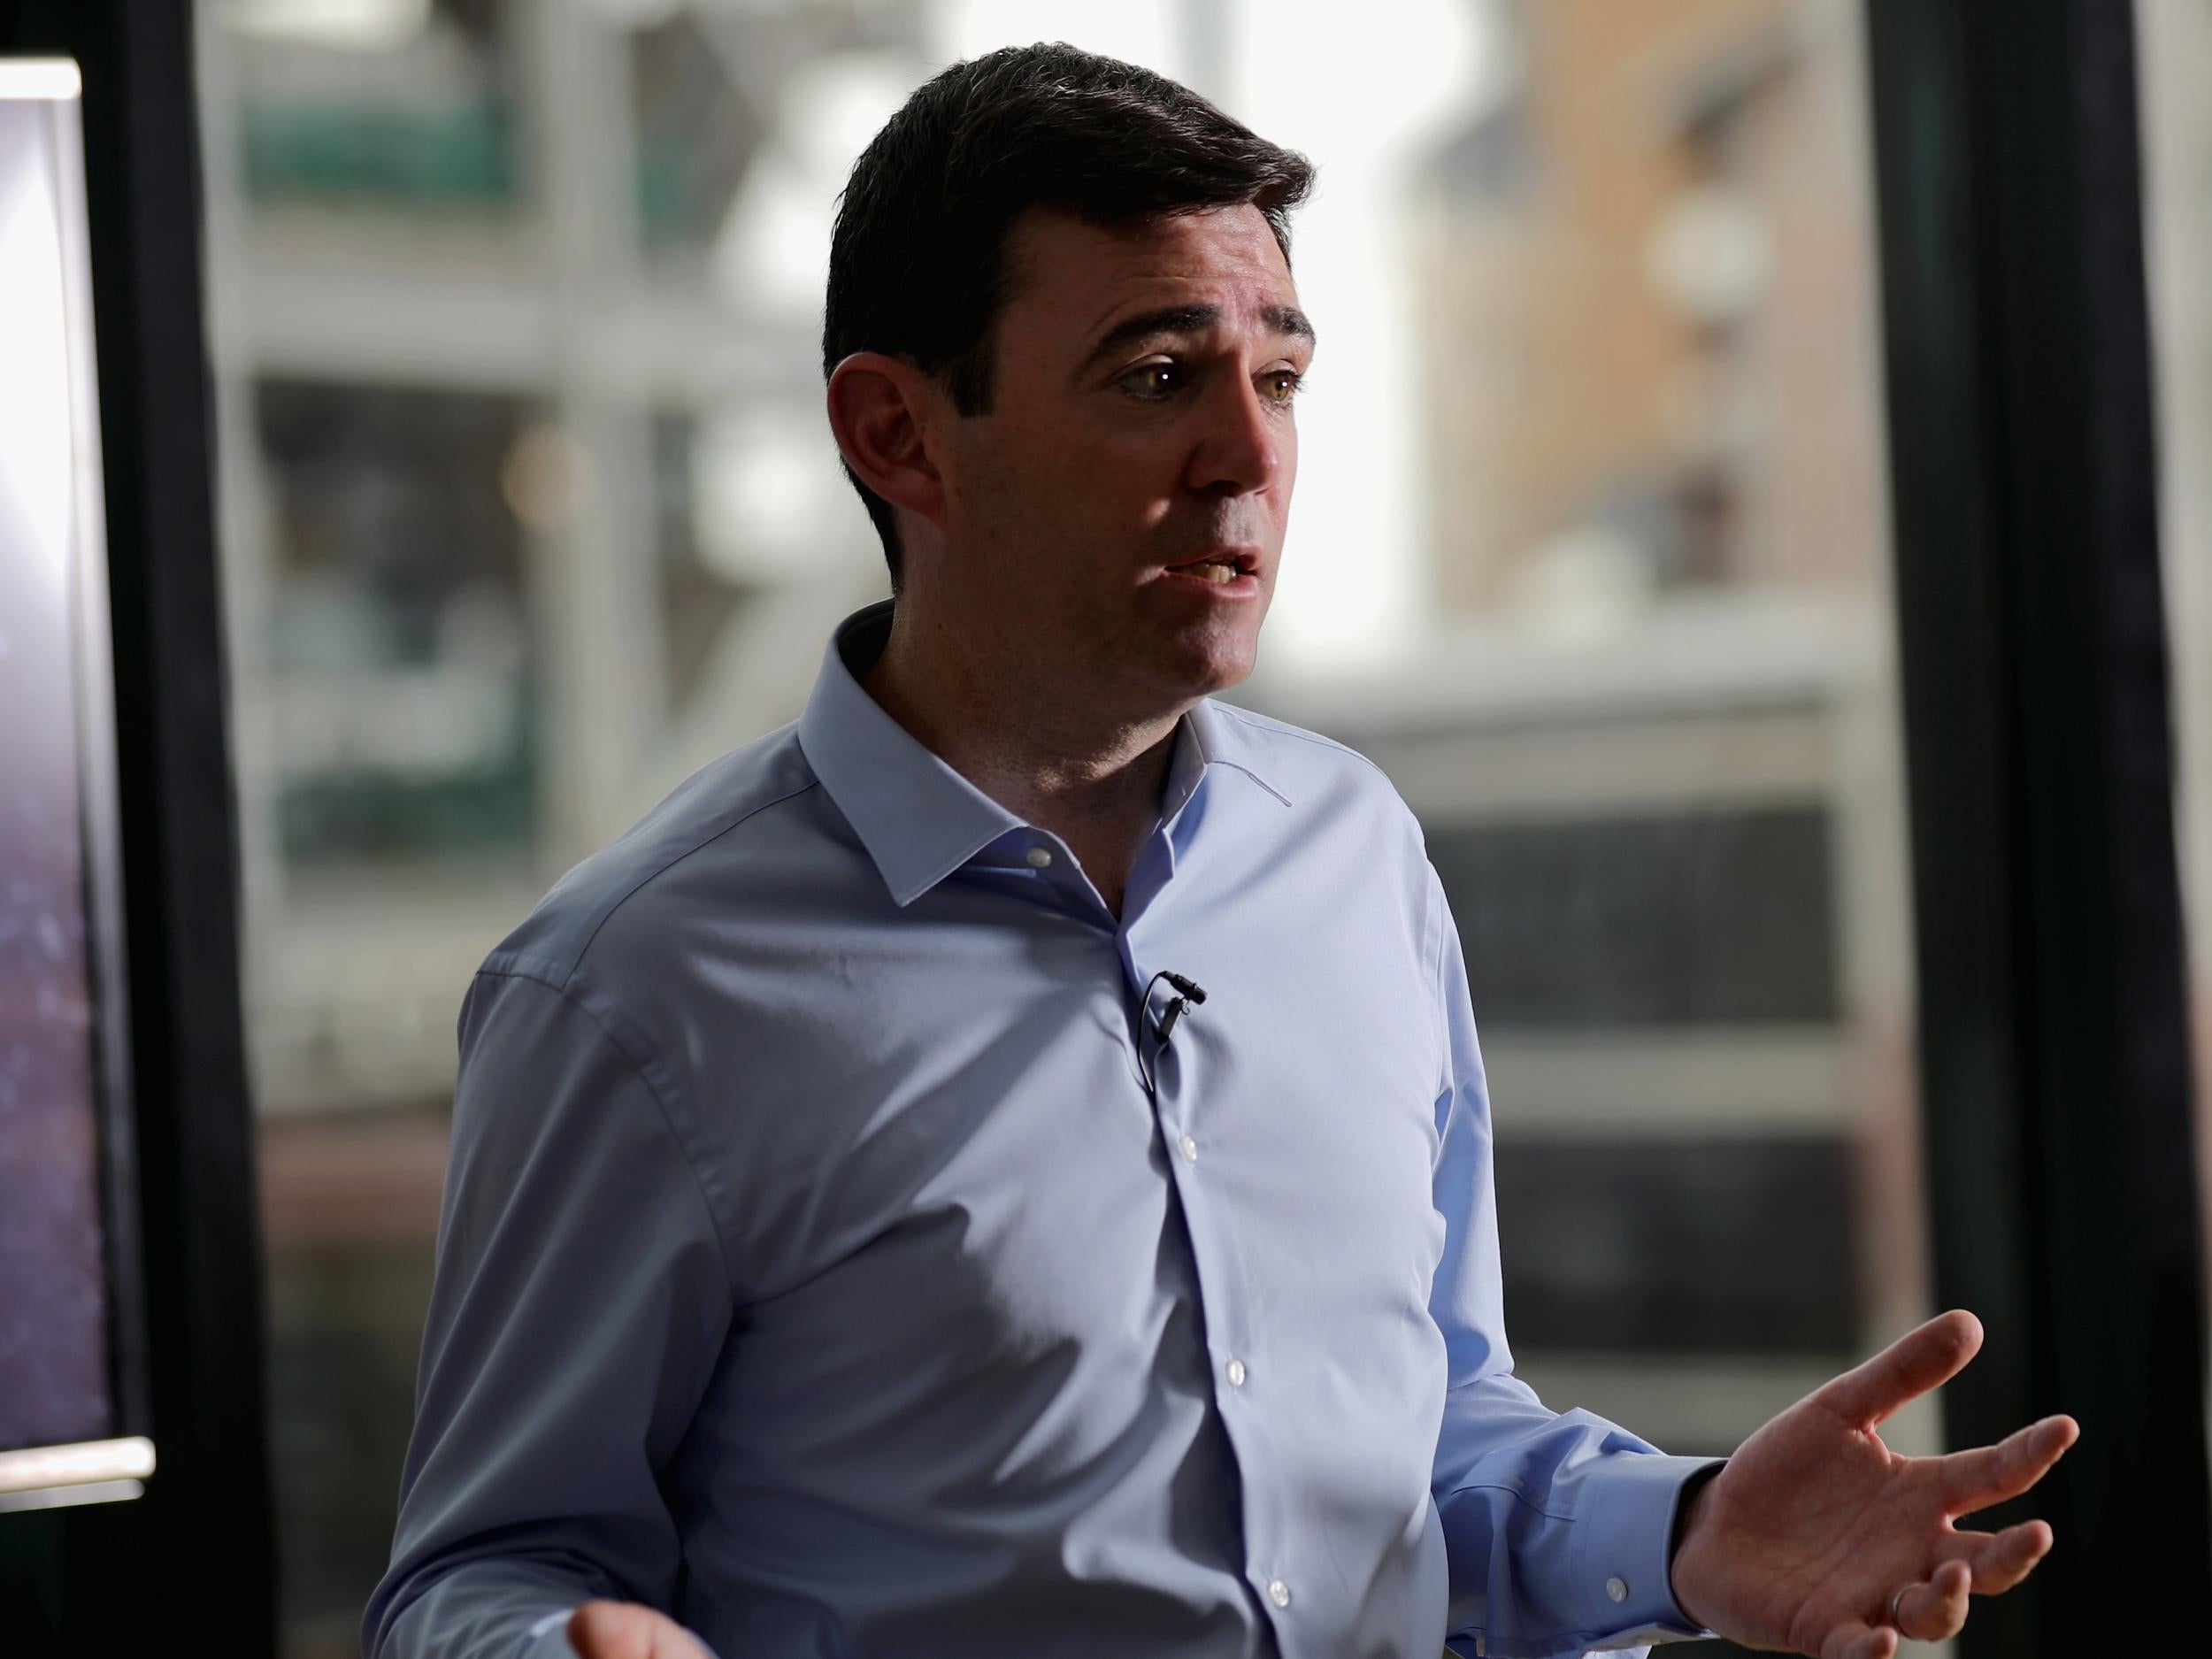 Who Is Andy Burnham And Where Does He Live